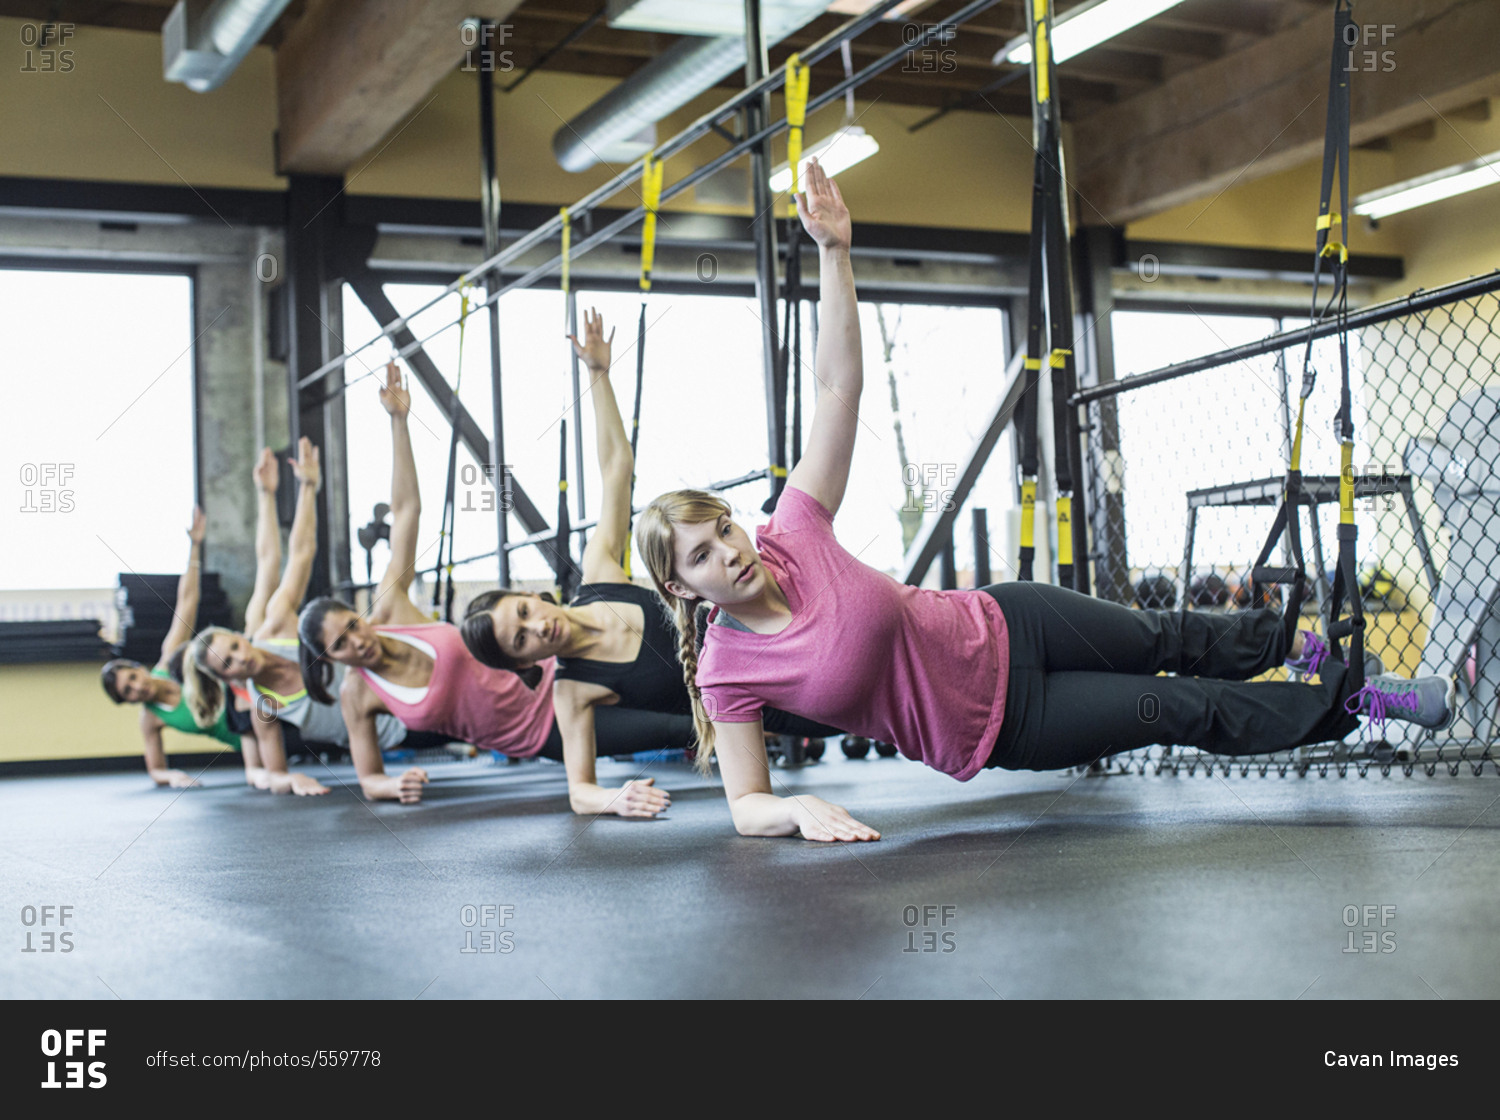 Women practicing side plank pose while balancing on resistance bands in gym